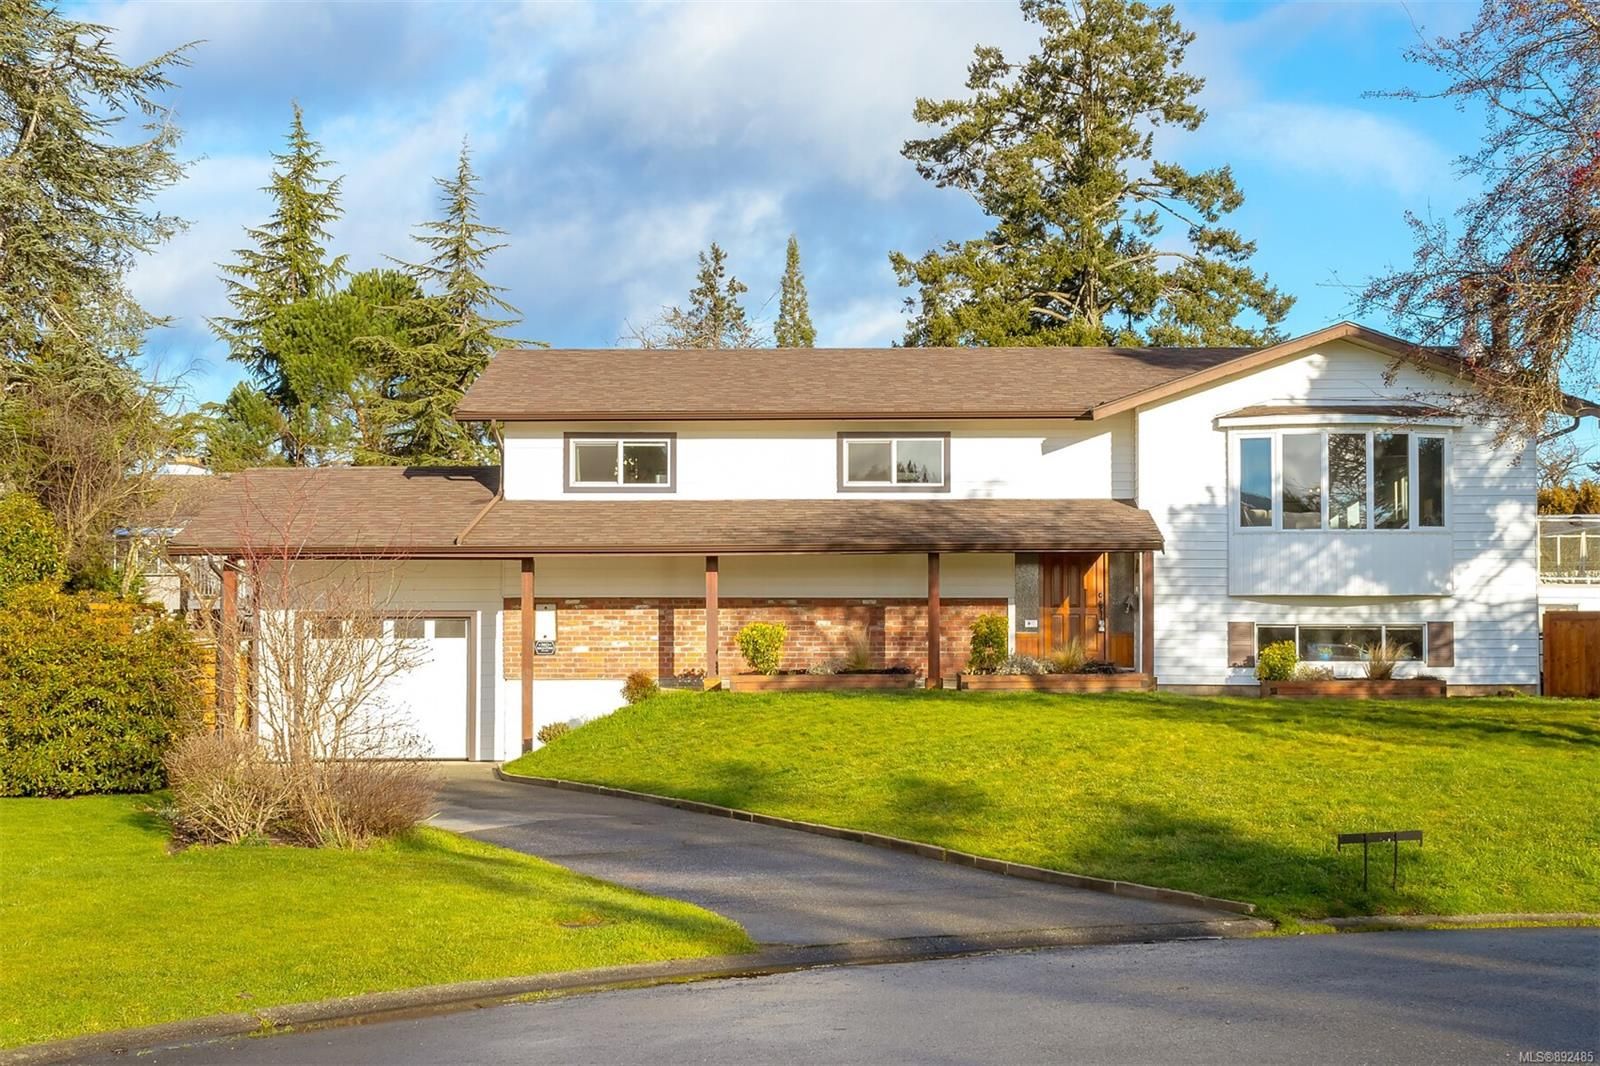 I have sold a property at 1368 Rafiki Pl in Central Saanich
